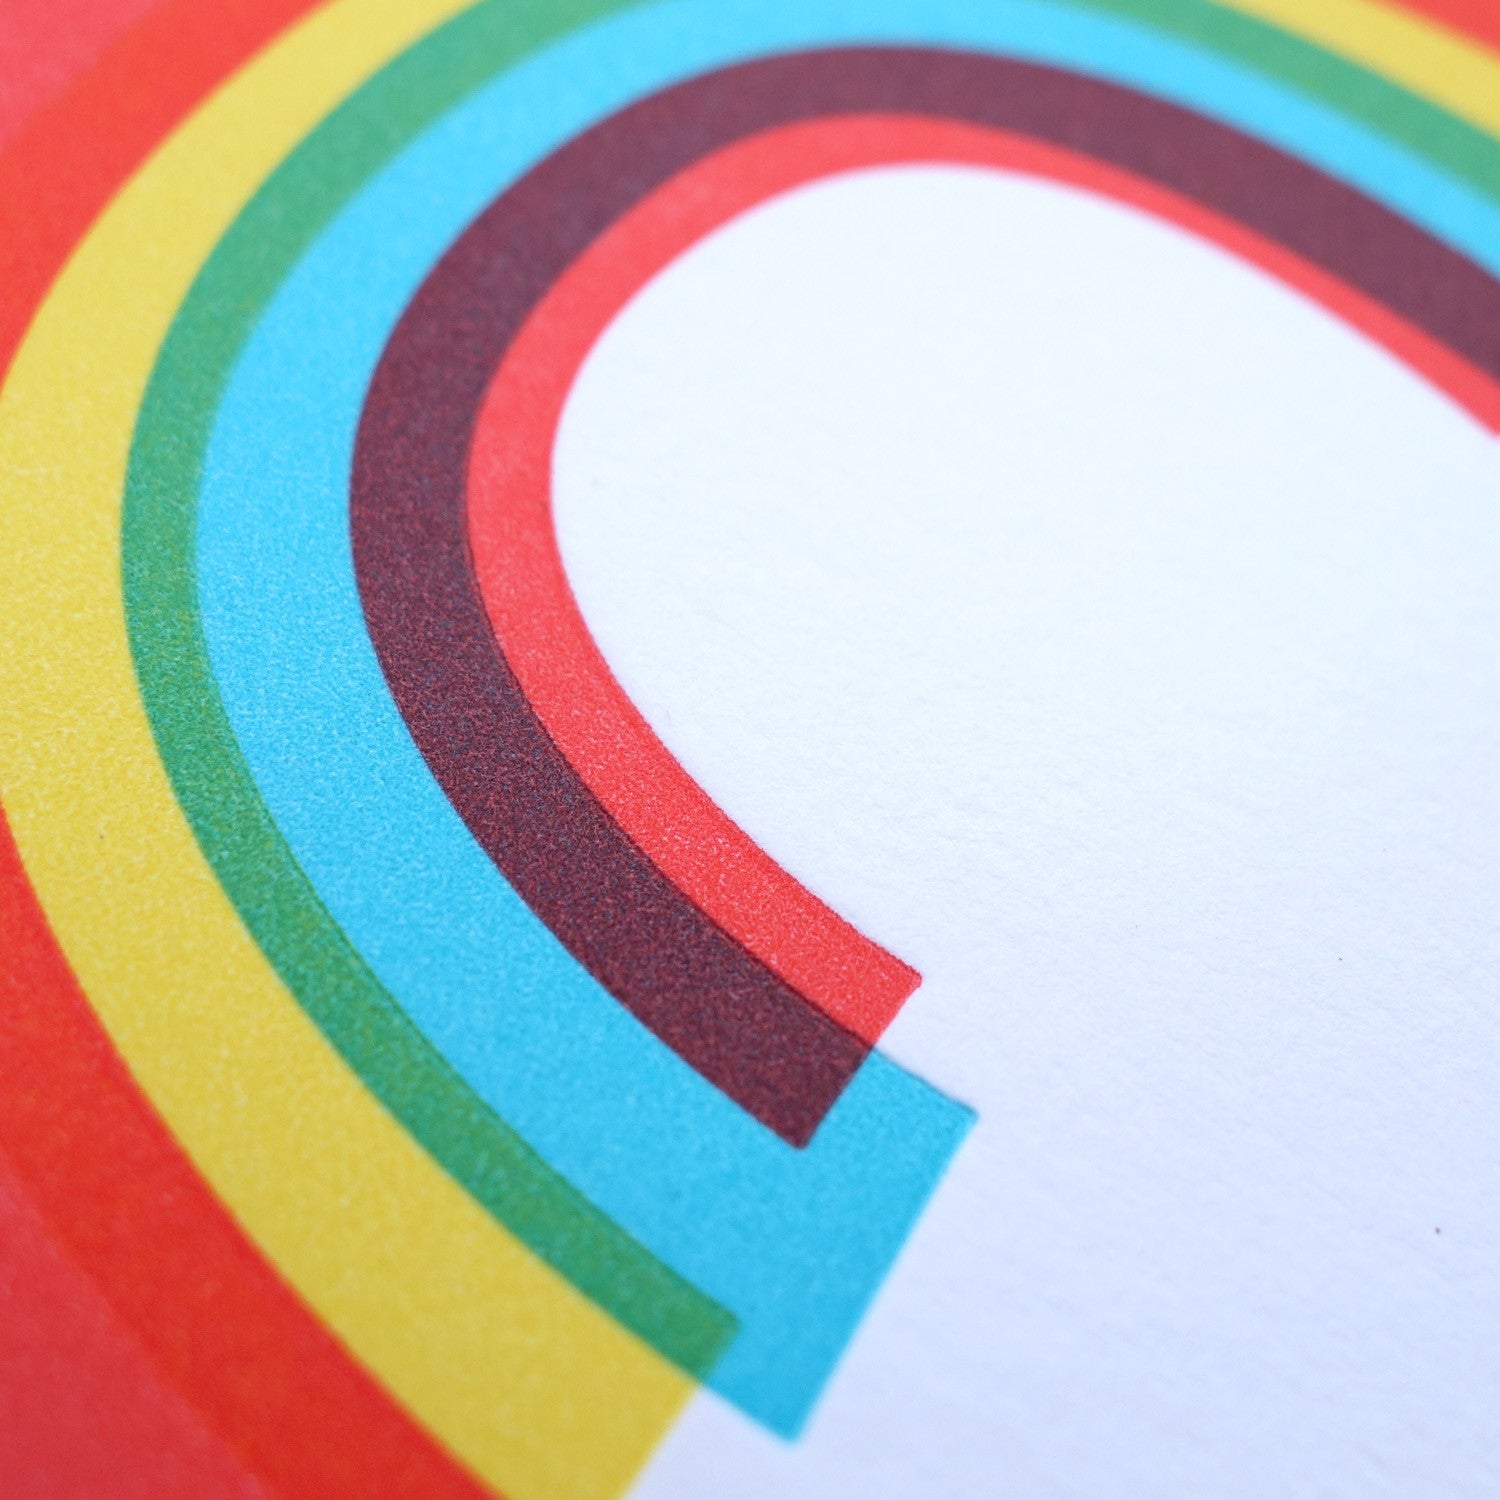 Detail of the letterpress texture of a white greeting card with a rainbow